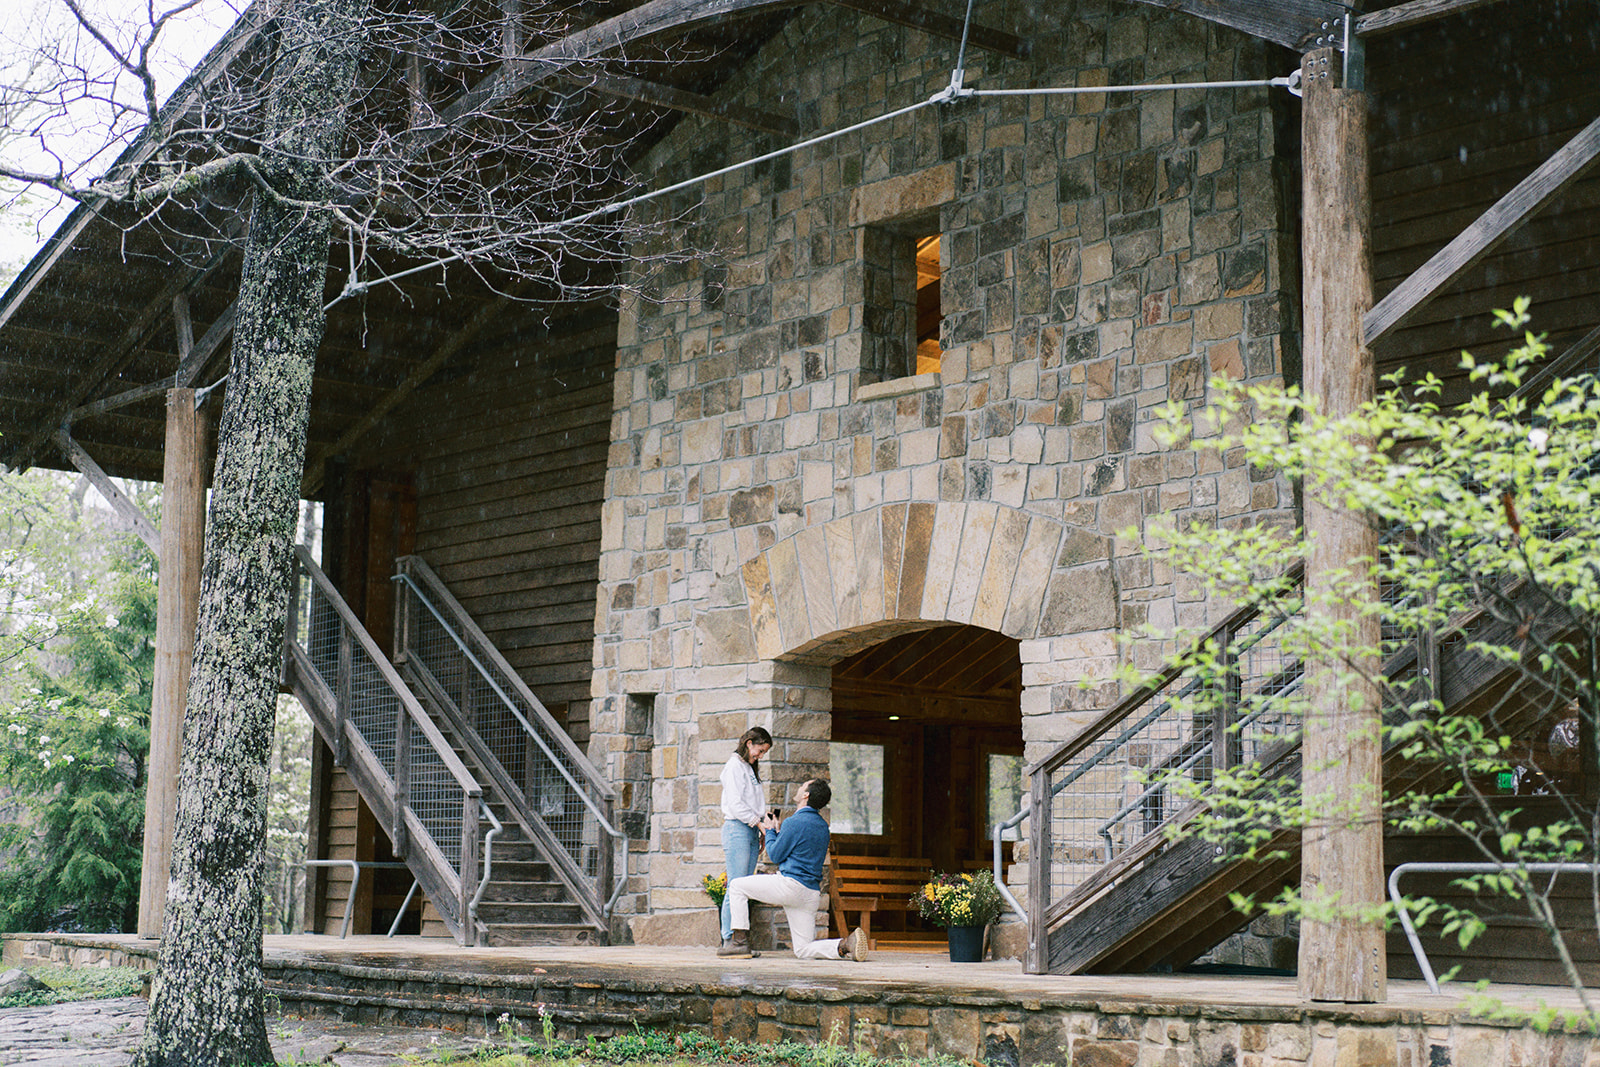 A young man surprises his girlfriend with a proposal in front of the beautiful gym at Camp DeSoto in Mentone, Alabama